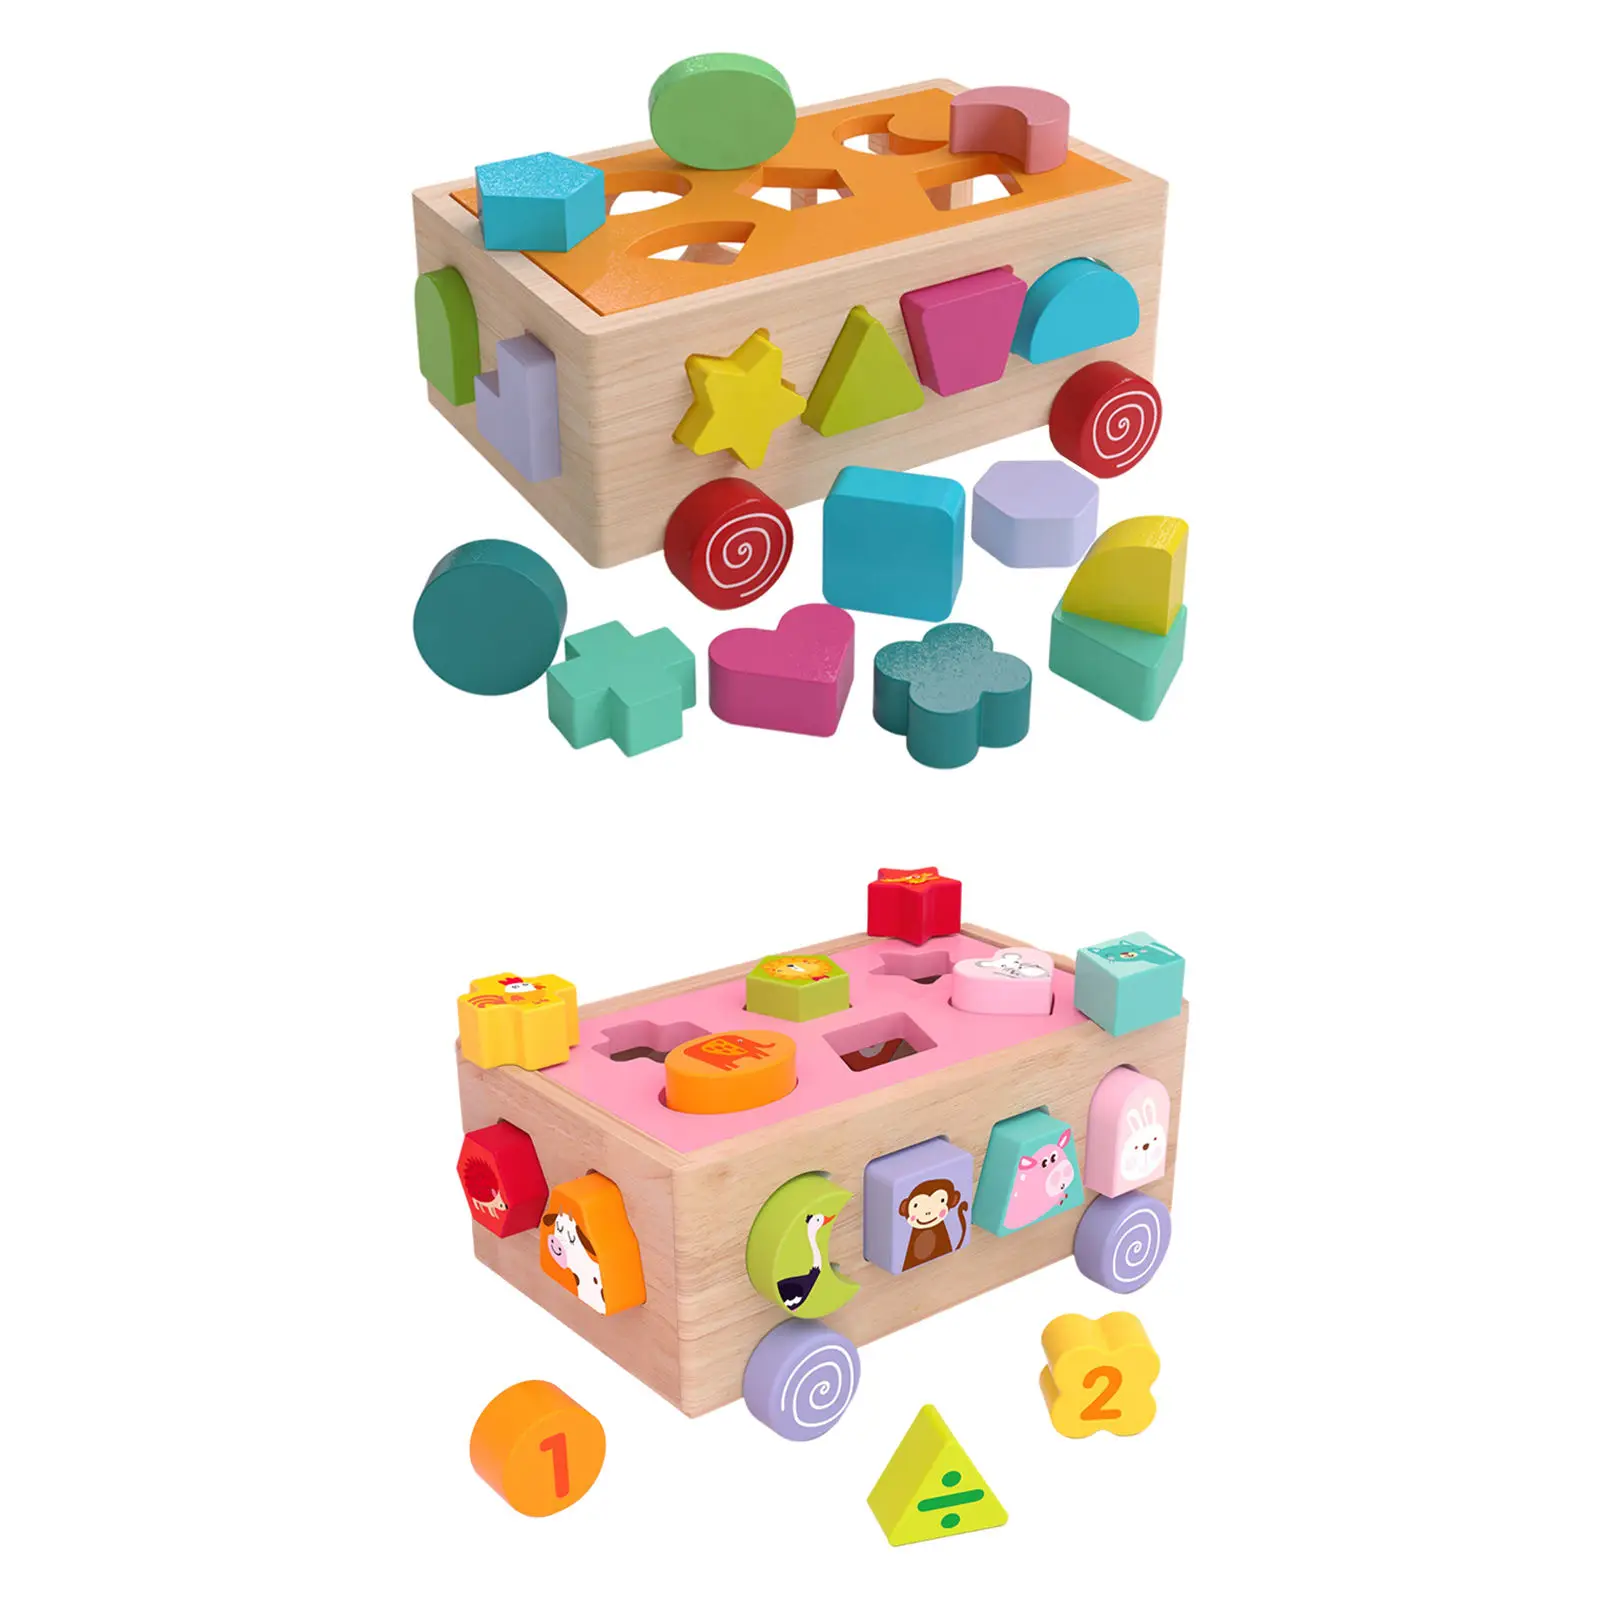 Shape Sorting Cube Board Box Colorful Didactic Classic Classic Present Creative Early Development Build Bricks for Birthday Gift